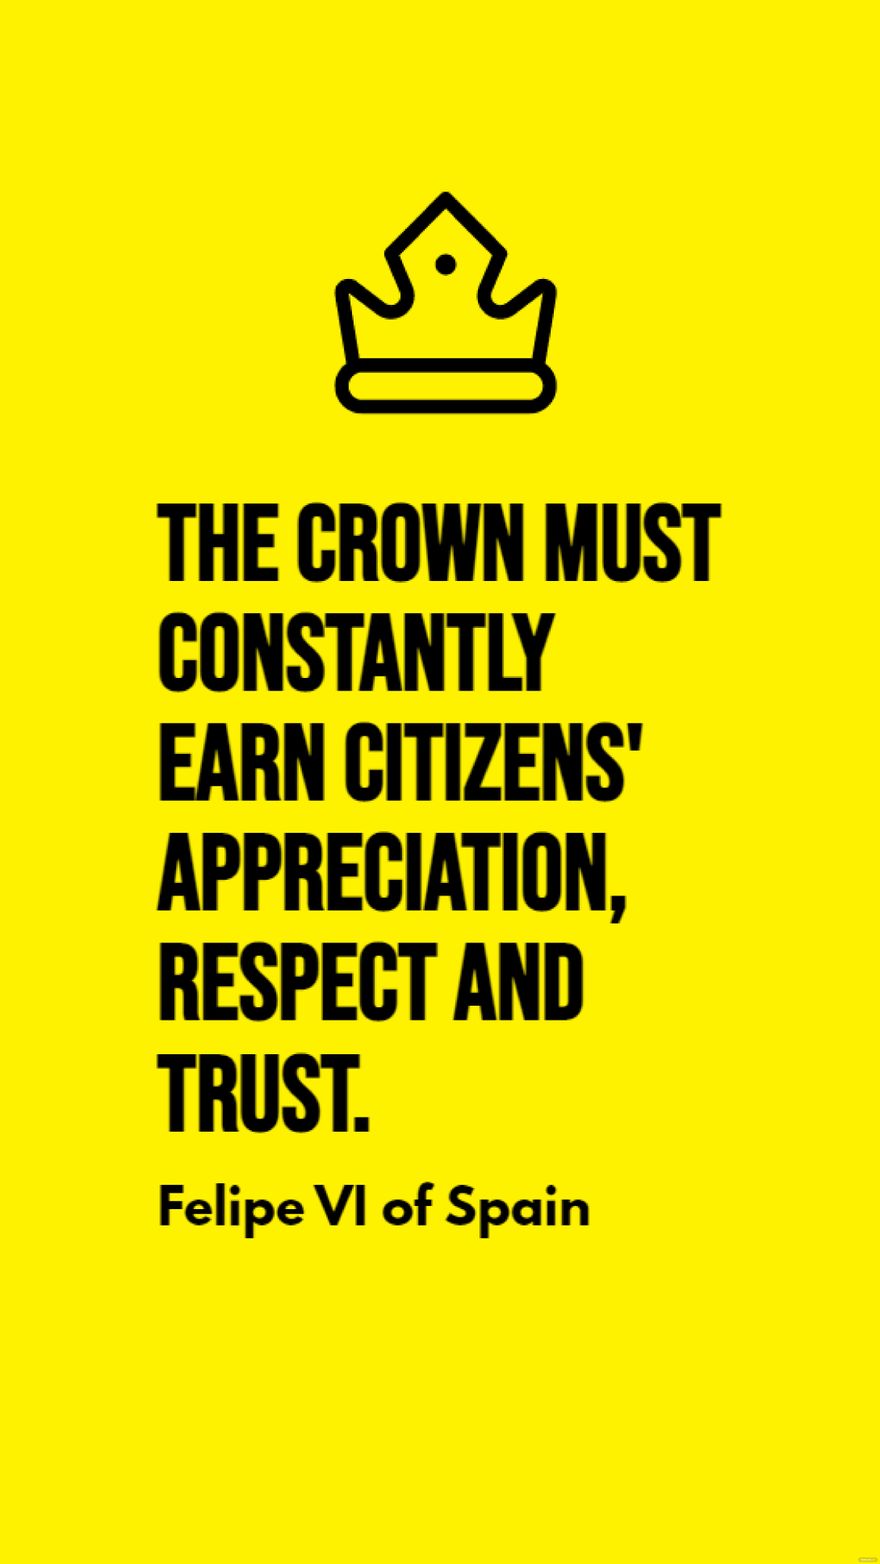 Felipe VI of Spain - The crown must constantly earn citizens' appreciation, respect and trust.